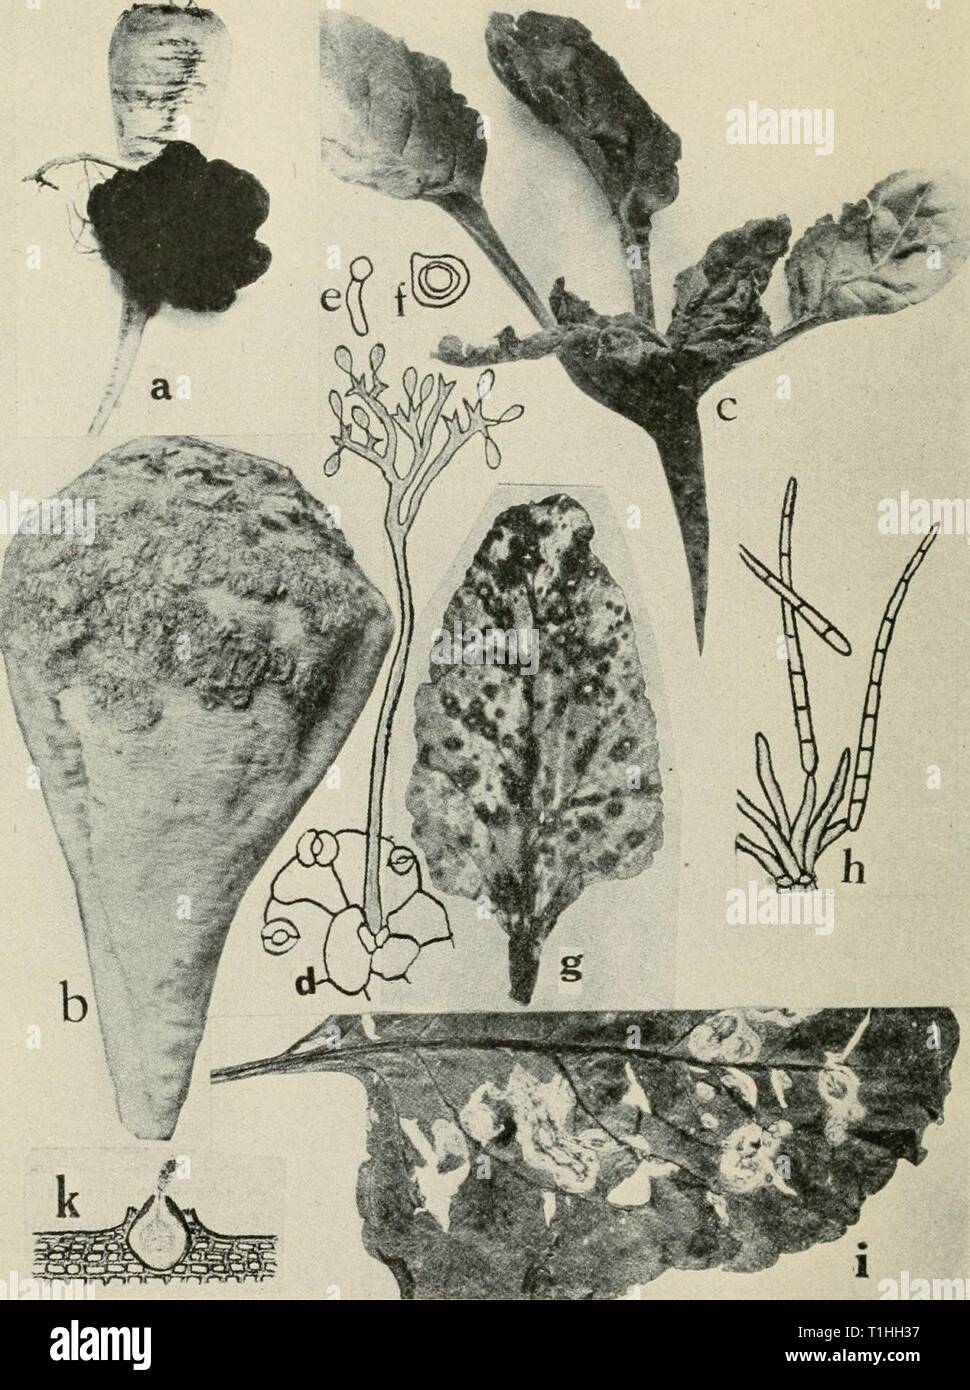 Diseases of truck crops and Diseases of truck crops and their control  diseasesoftruckc00taub Year: 1918  Fig. 20. Beet Diseases. a. Crown gall, b. scab, c. downy mildew, d. Conidiophore of Pernnospora schachlii arising from a stomate of an infected beet leaf, e. germinating zoospore of P. schach- lii, f. oospore of P. schachlii, g. Cercospora leaf spot (after Halsted), h. conidiophore and conidia of Cercospora belt cola (after Duggar), i. Phoma leaf spot (after Pool and McKay), k. pycnidium of Phoma beta; (after T. Johnson) (J.-/, after PriUieux). Stock Photo